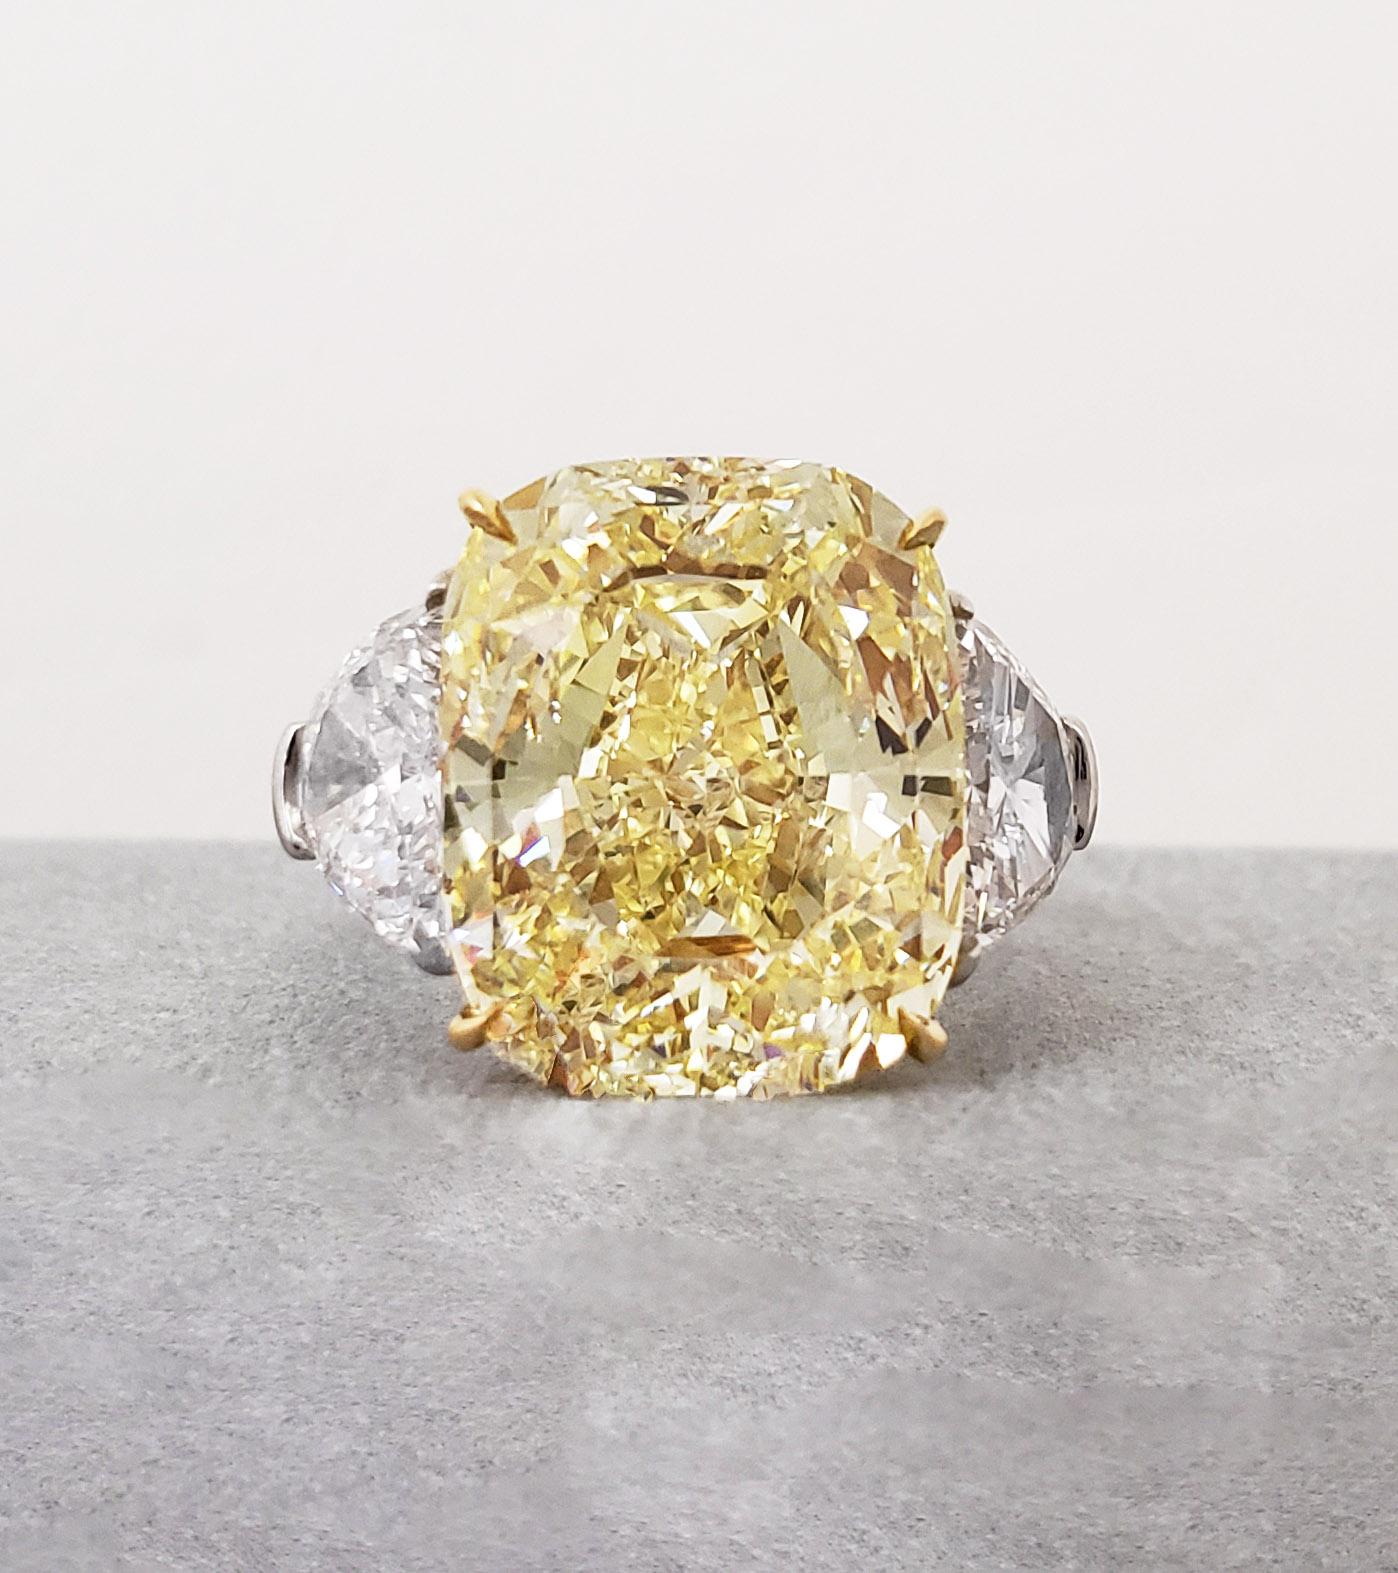 From SCARSELLI the world-renowned Natural Fancy Color diamonds, this 11-carat Fancy Yellow cushion cut diamond set in an 18k yellow gold and platinum ring flanked by half-moons E VS1 diamonds totaling 1.46ct Wonderfully tailored, this ring